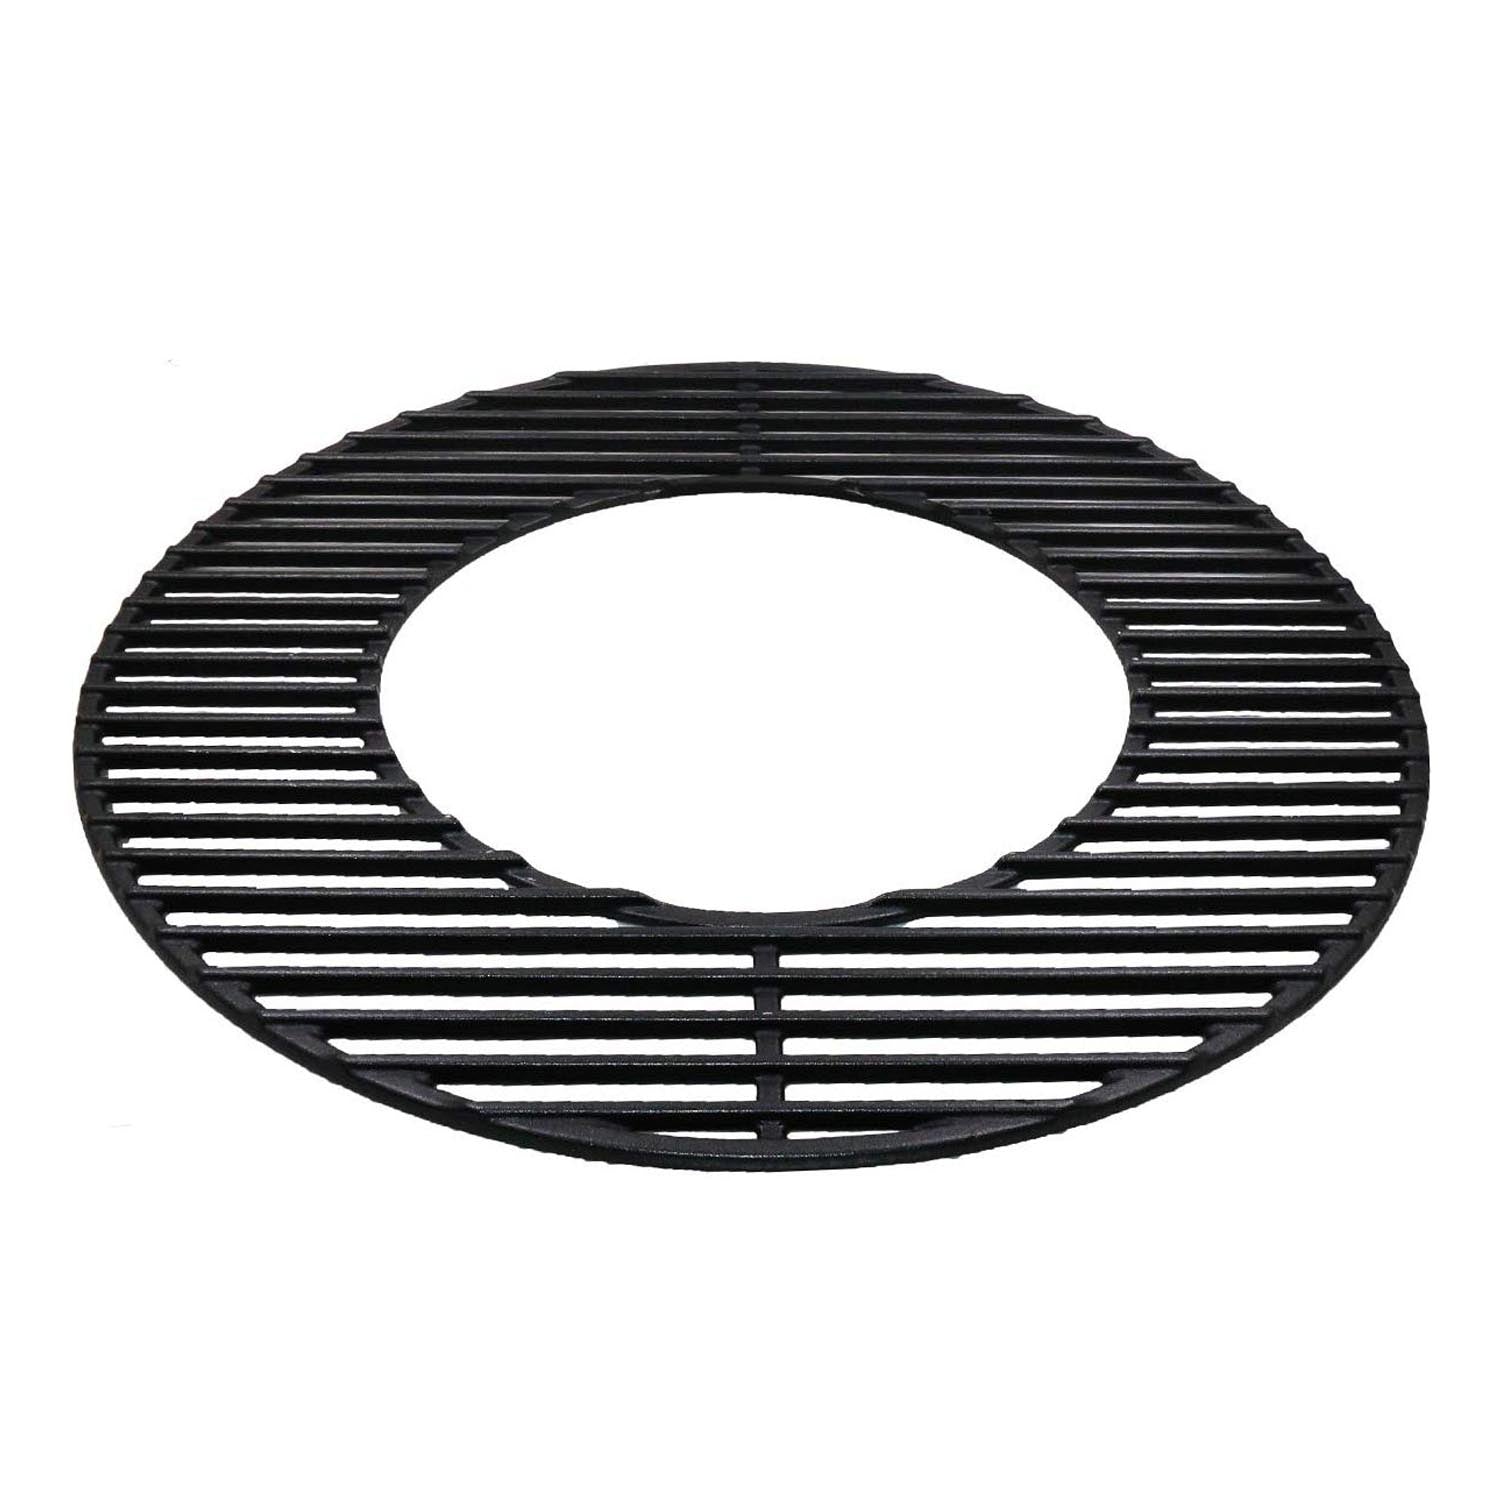 Uniflasy 8835 Cast Iron Gourmet BBQ System Cooking Grate for 22.5 inch  Weber Kettle Grill, One-Touch Bar-B-Kettle Master-Touch, Performer, Recteq